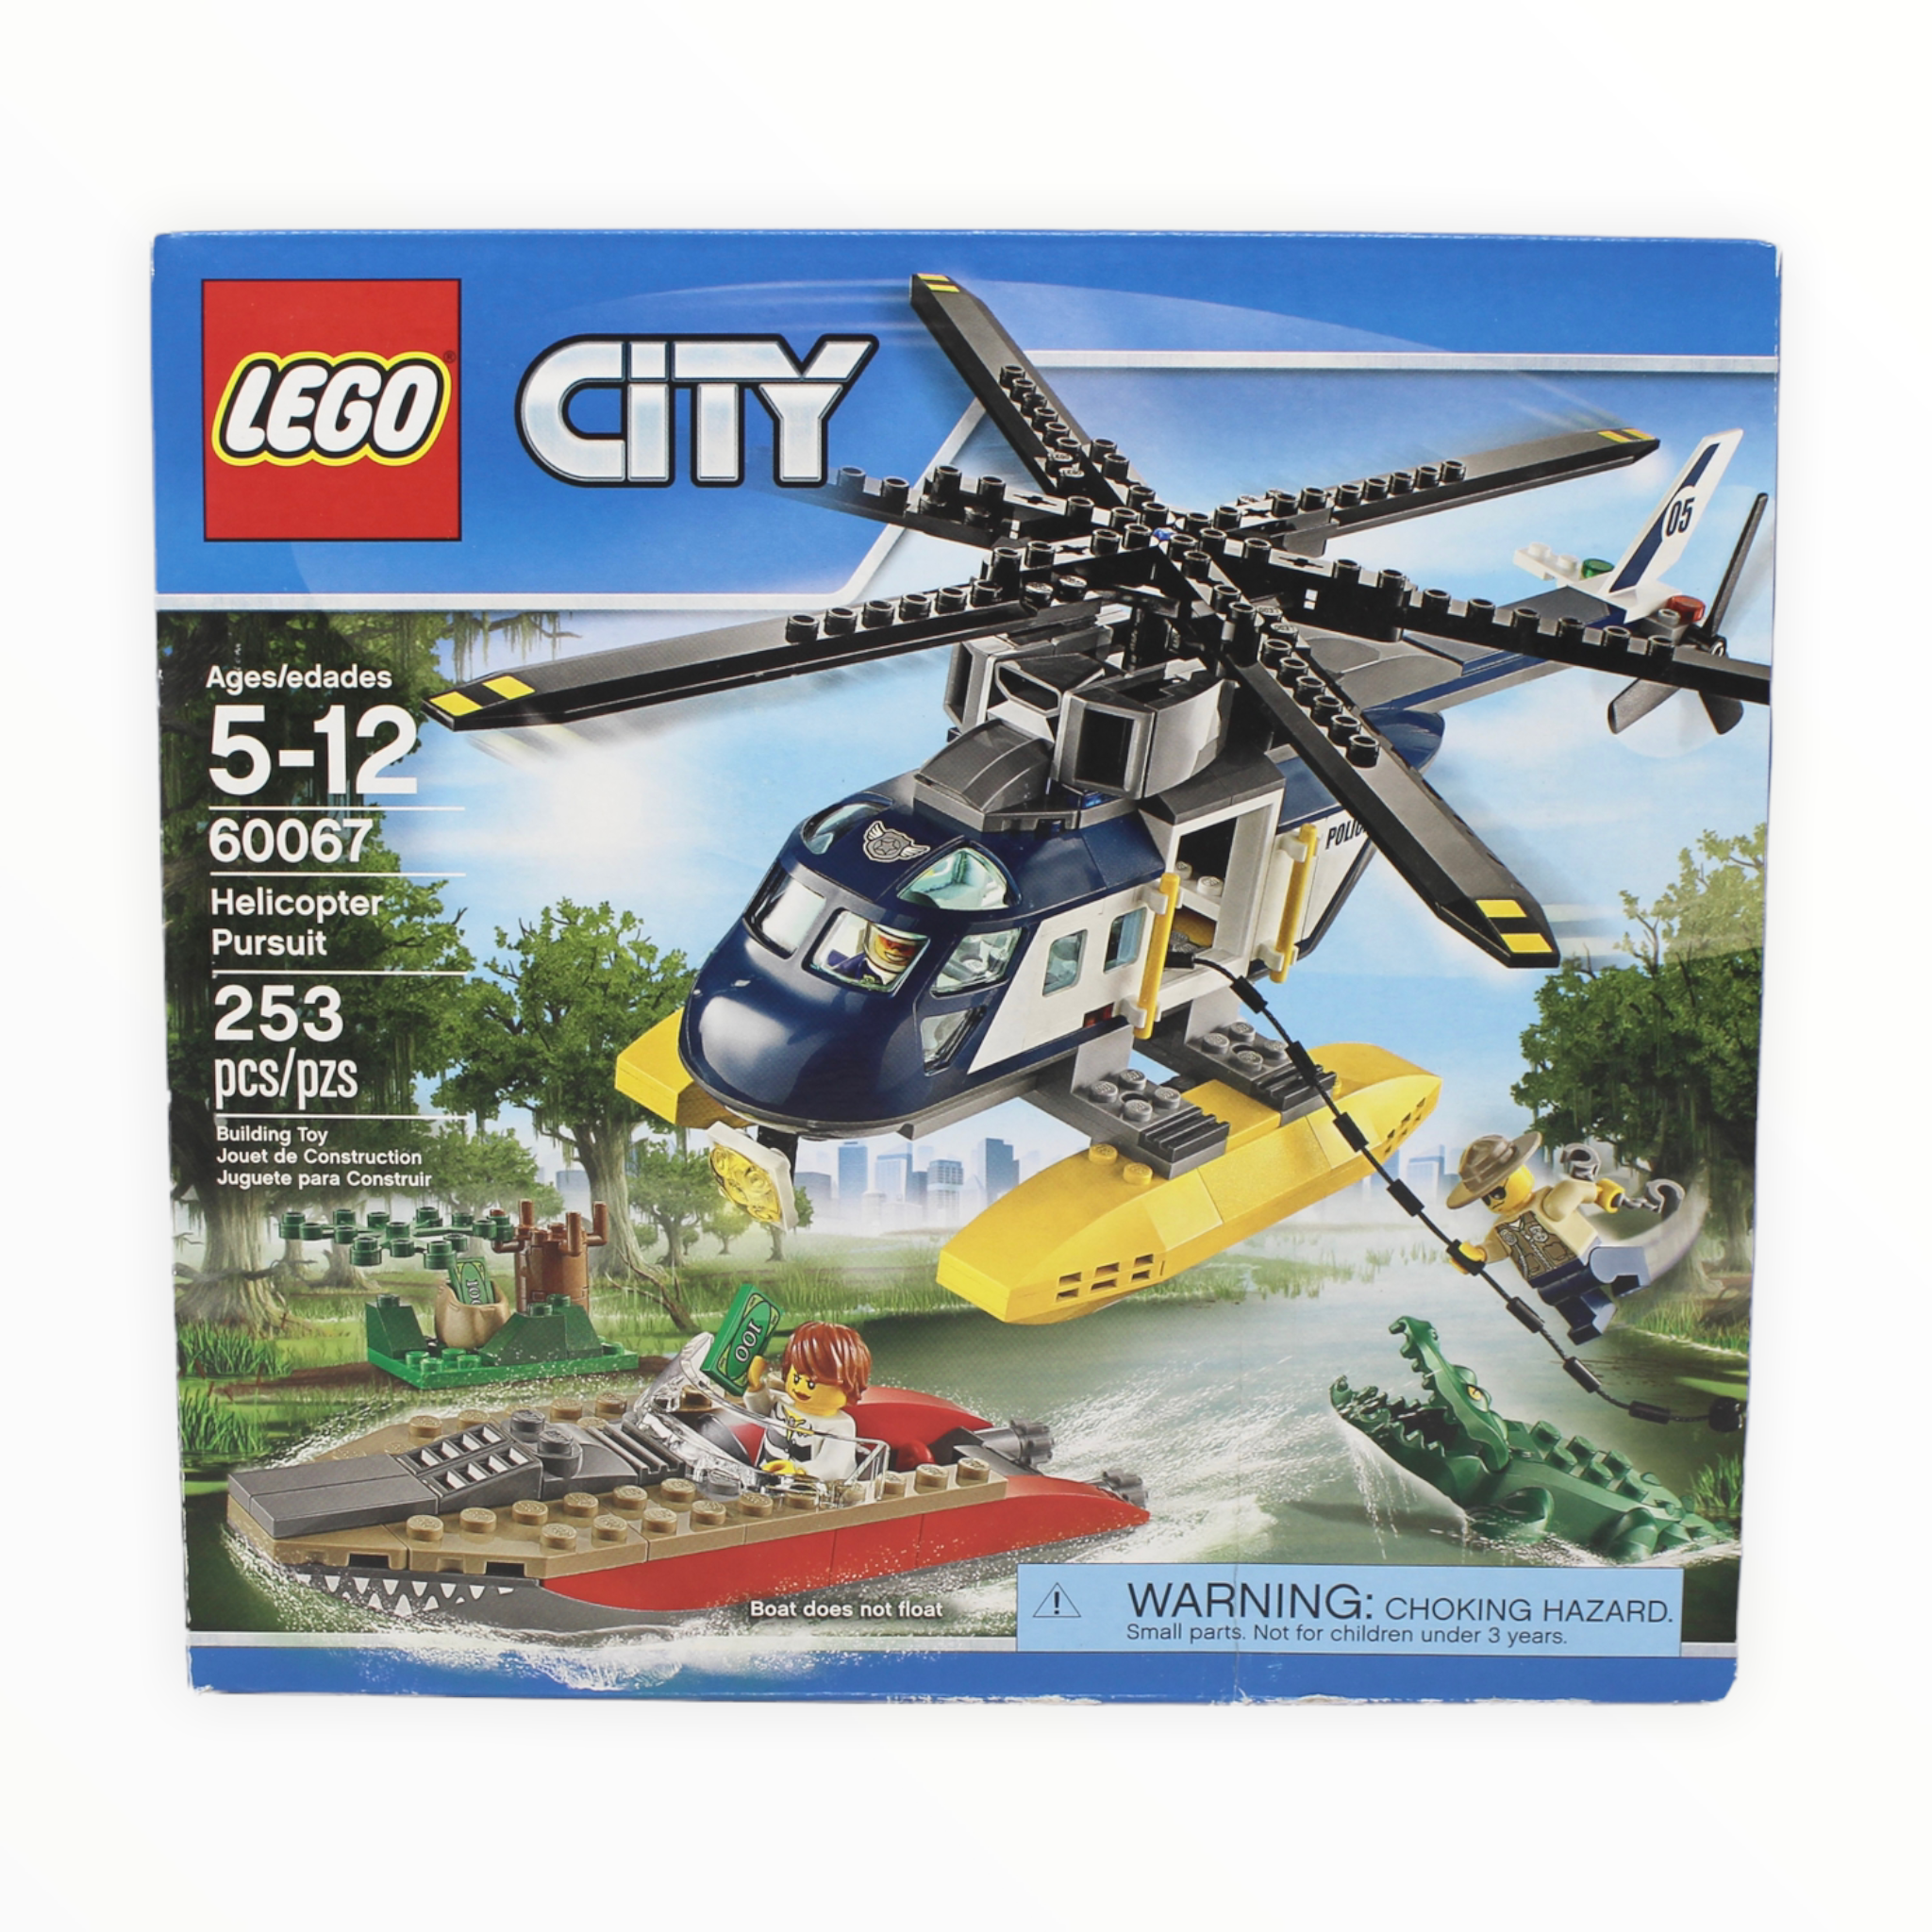 Retired Set 60067 City Helicopter Pursuit